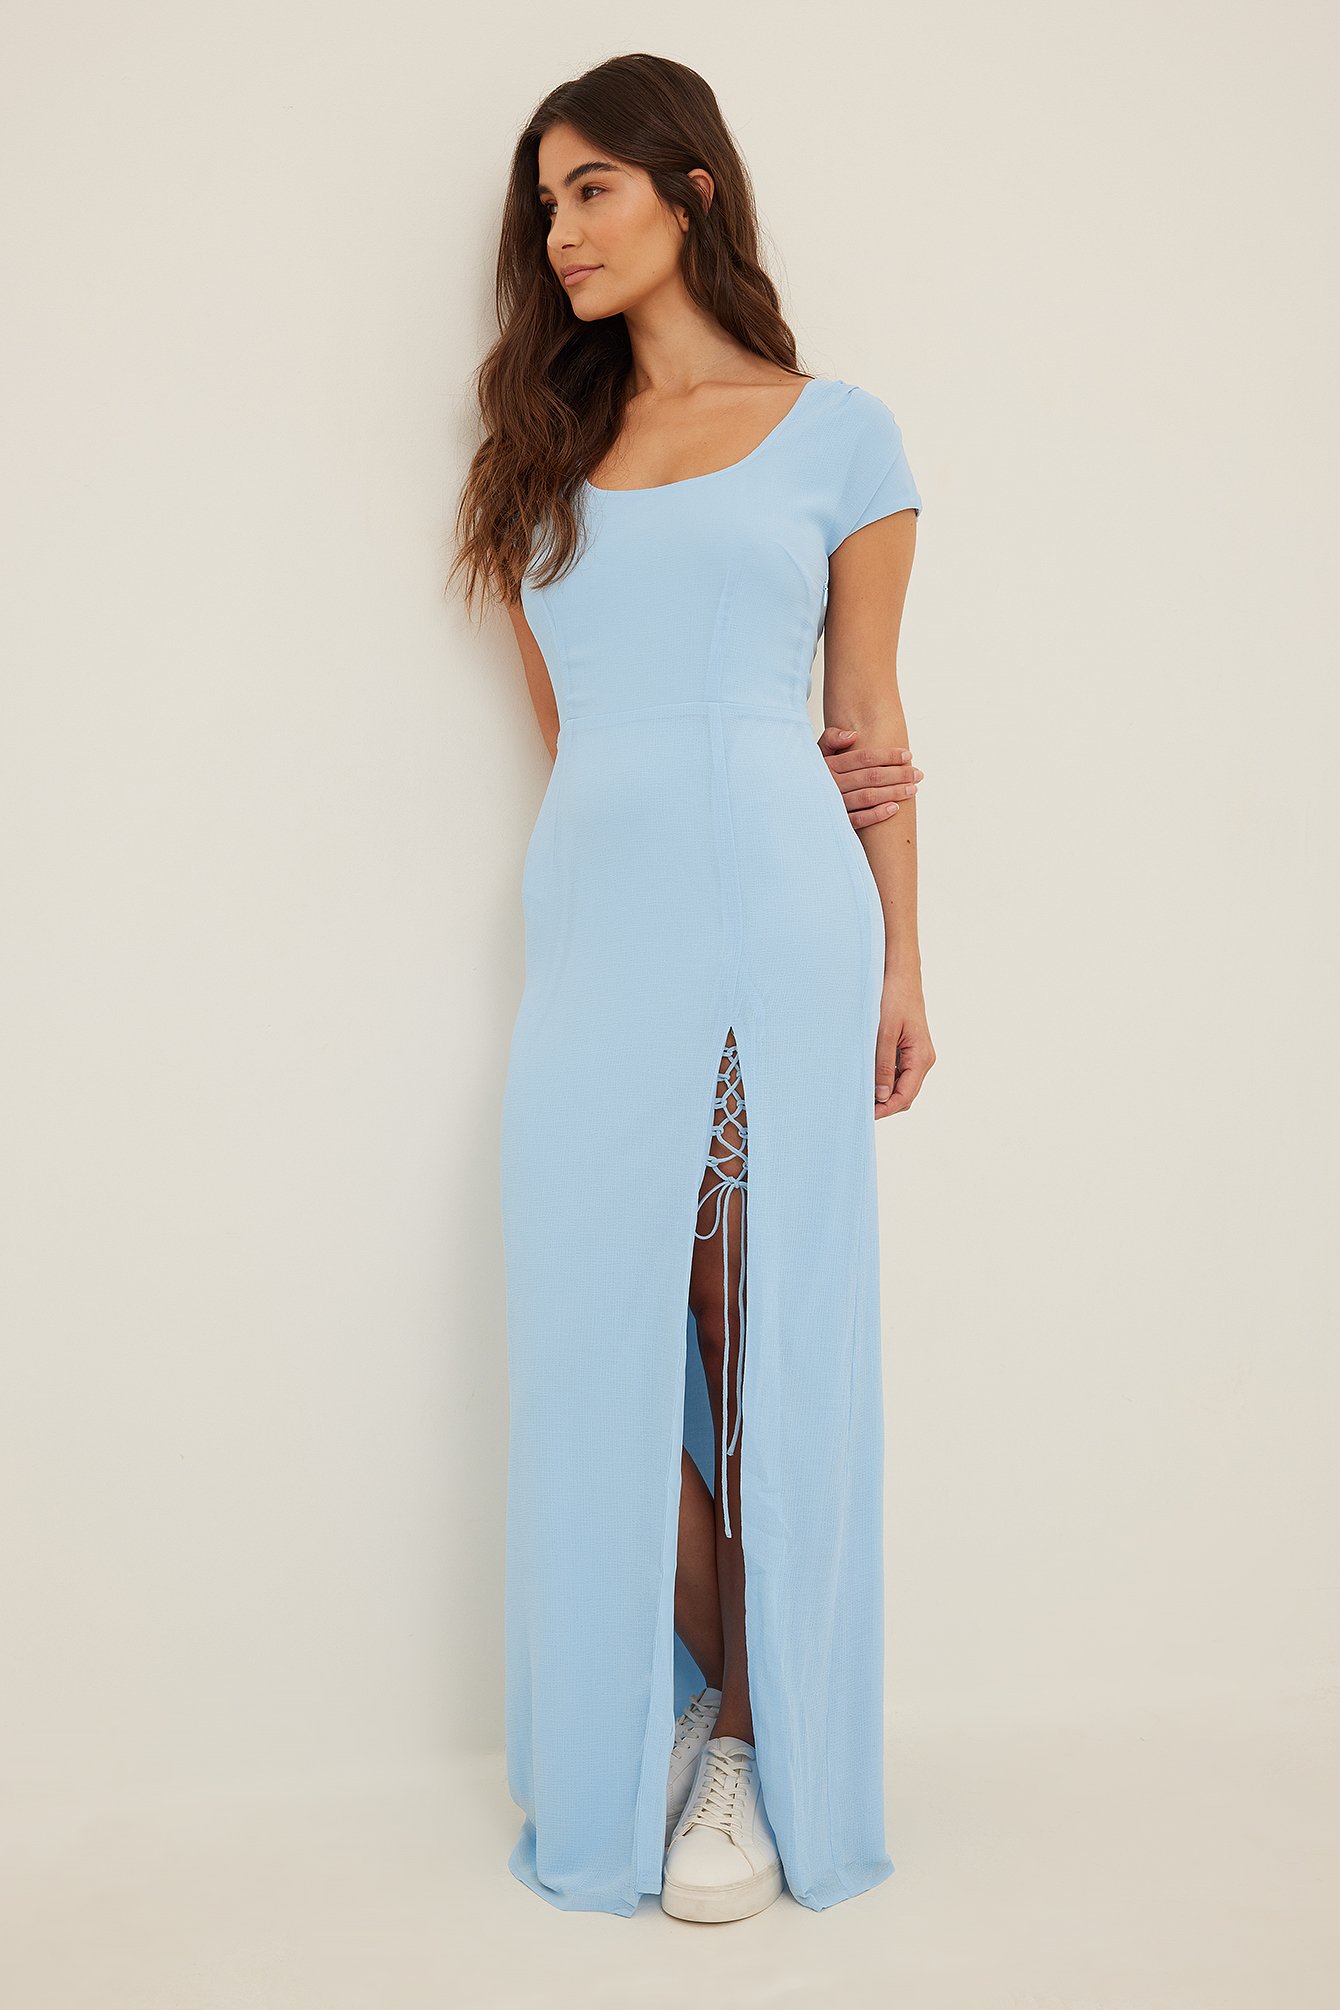 Dusty Blue Lacing Detail Recycled Maxi Dress